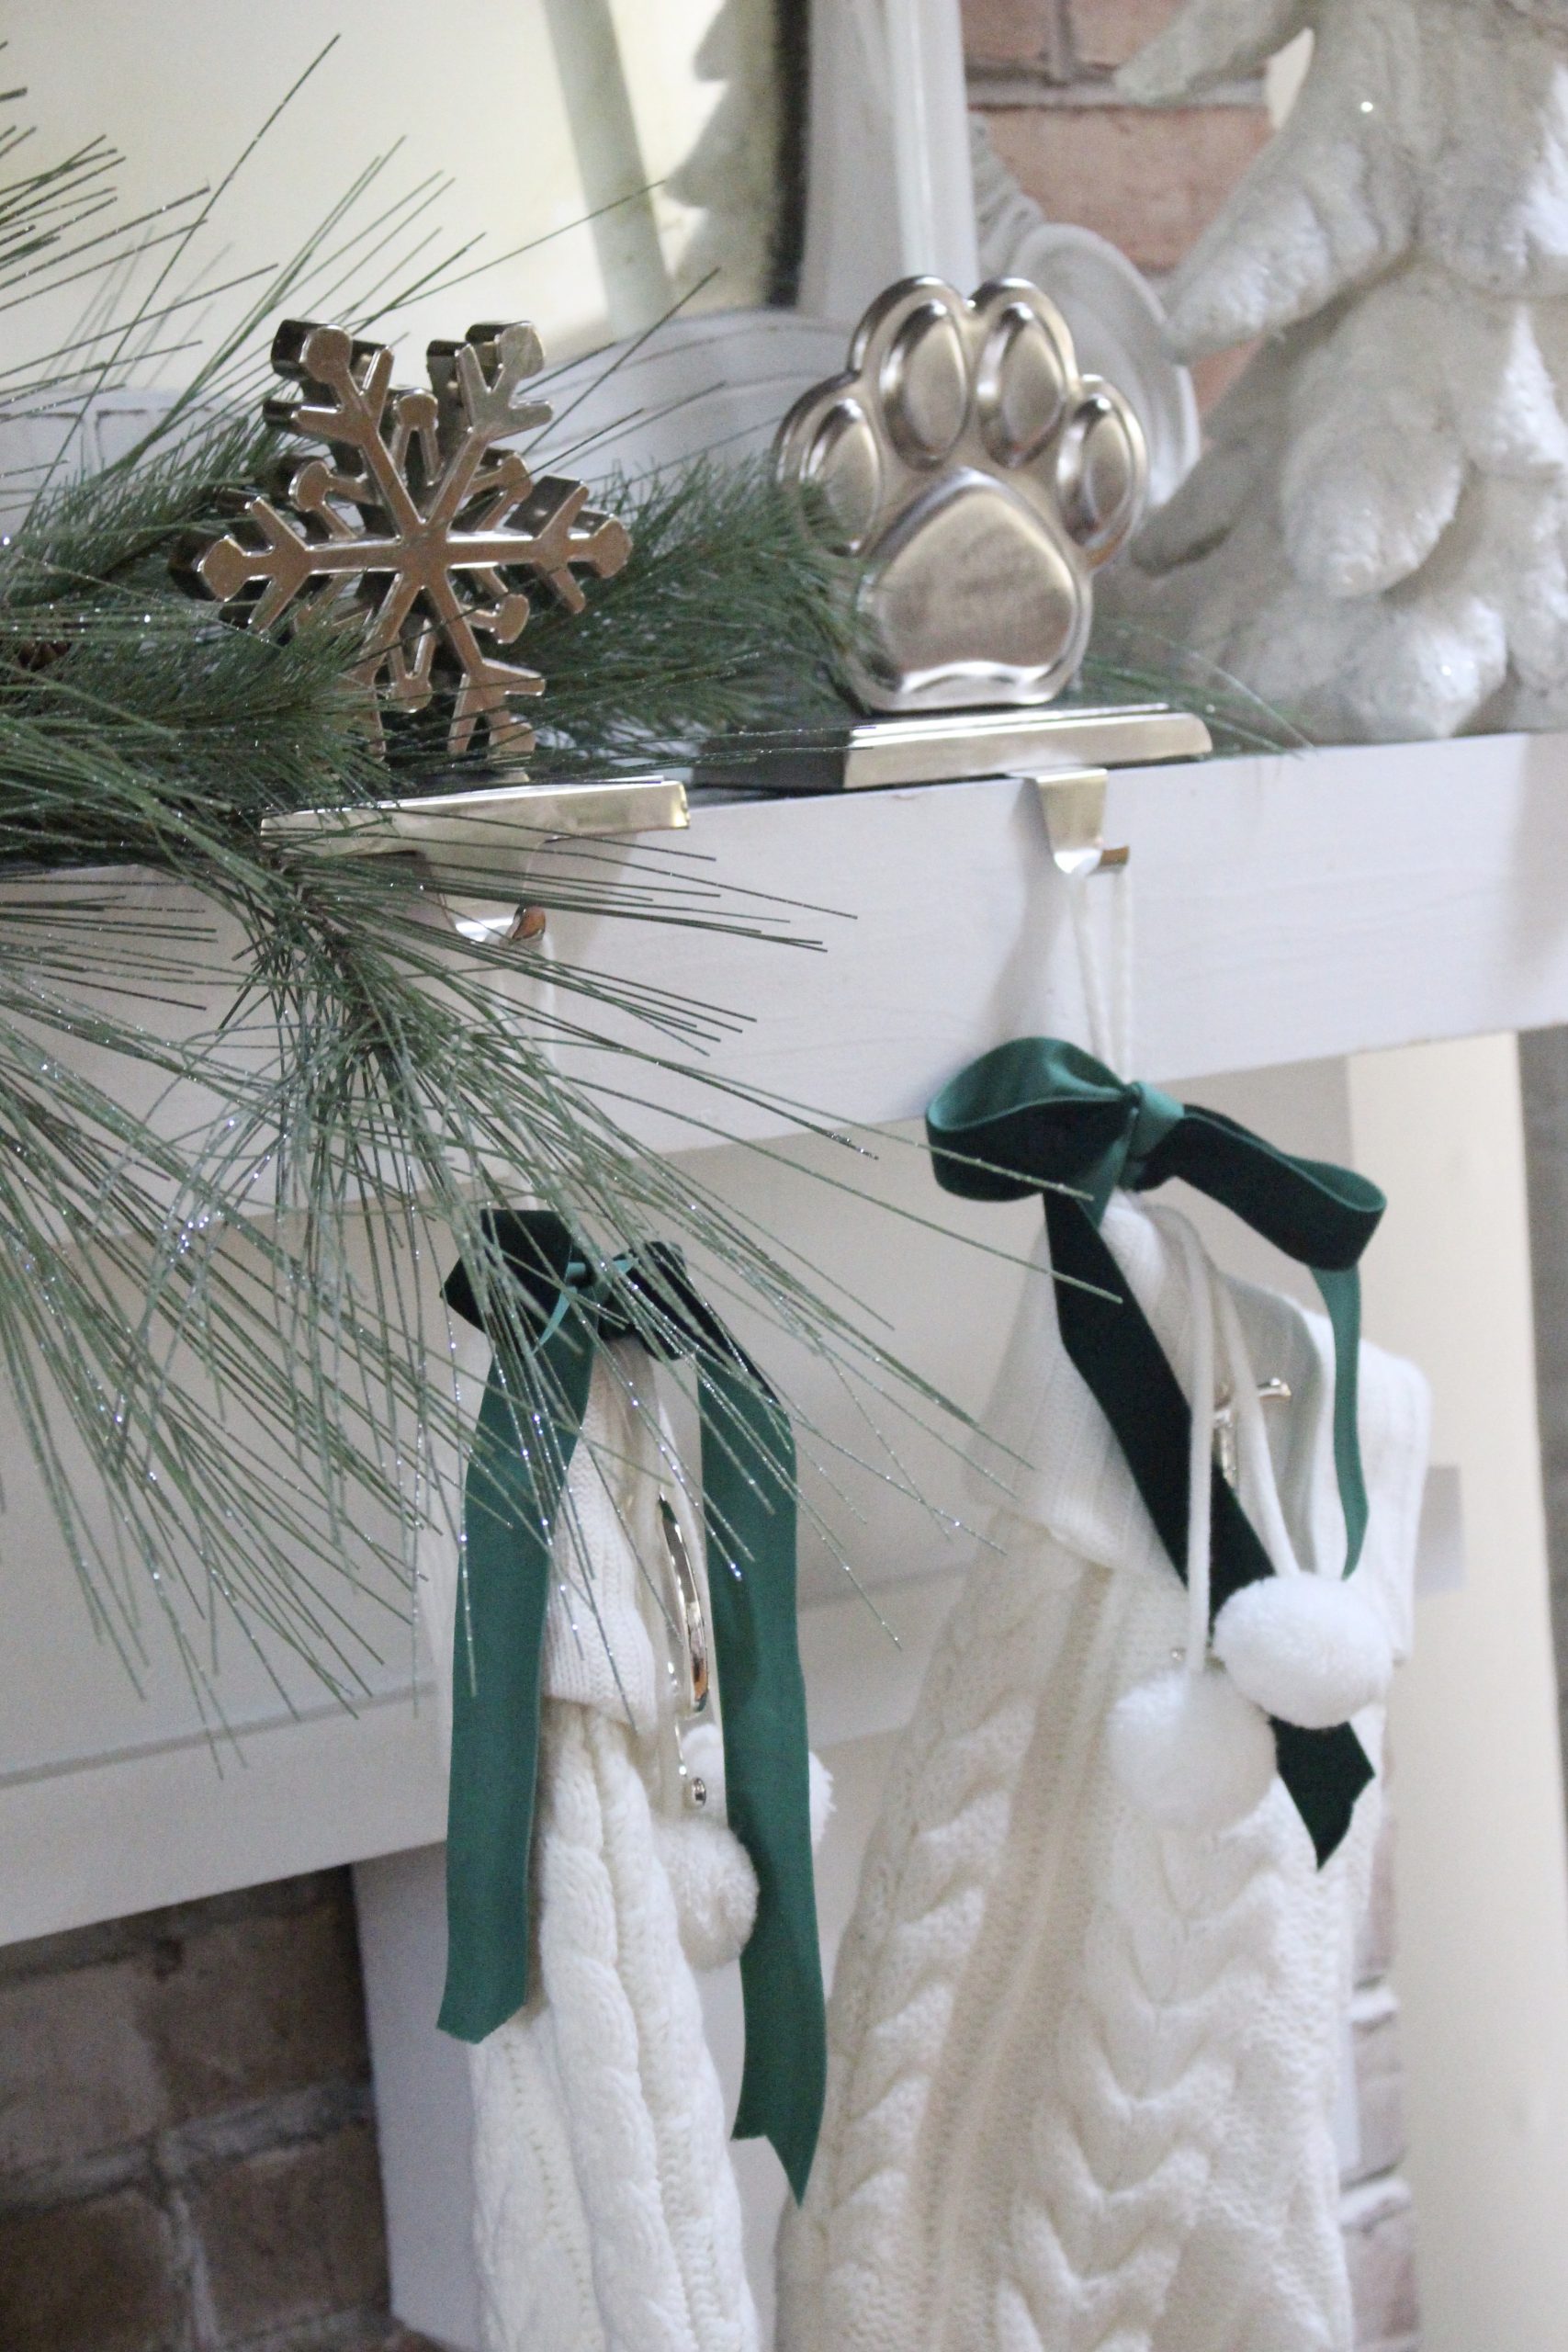 Our Classic & Cozy Christmas Family Room~ White Cottage Home & Living